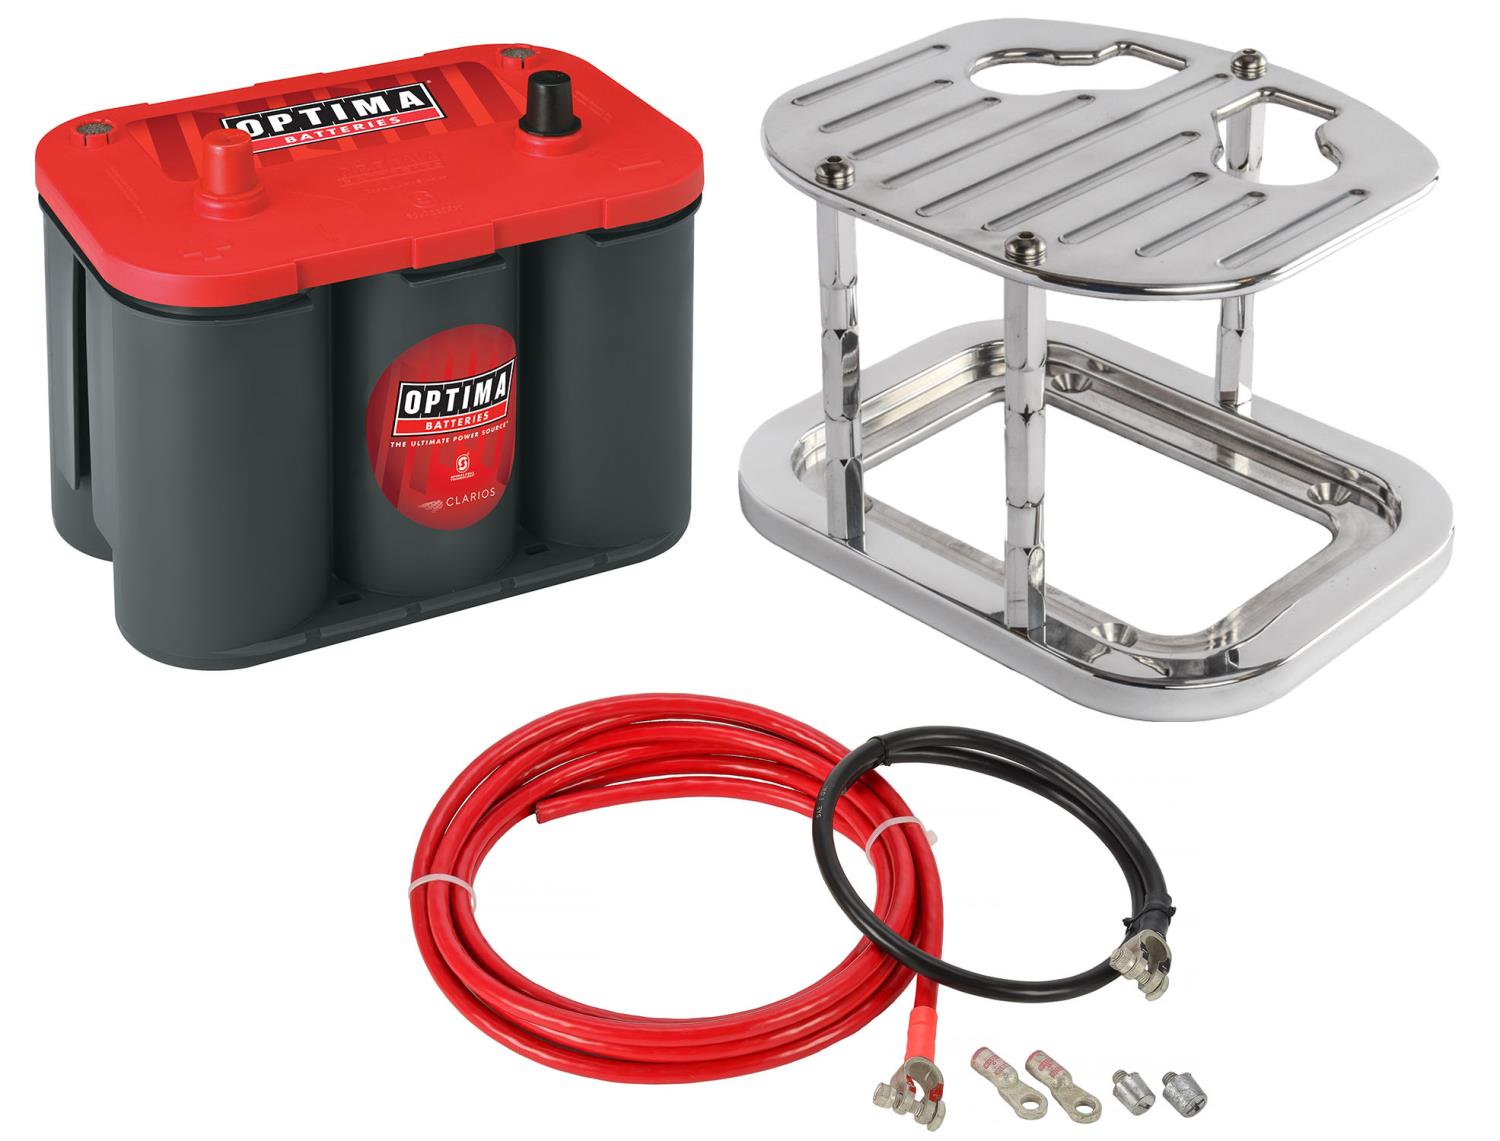 RedTop 12 V Battery and Polished Ball Mill Finish Mount Kit